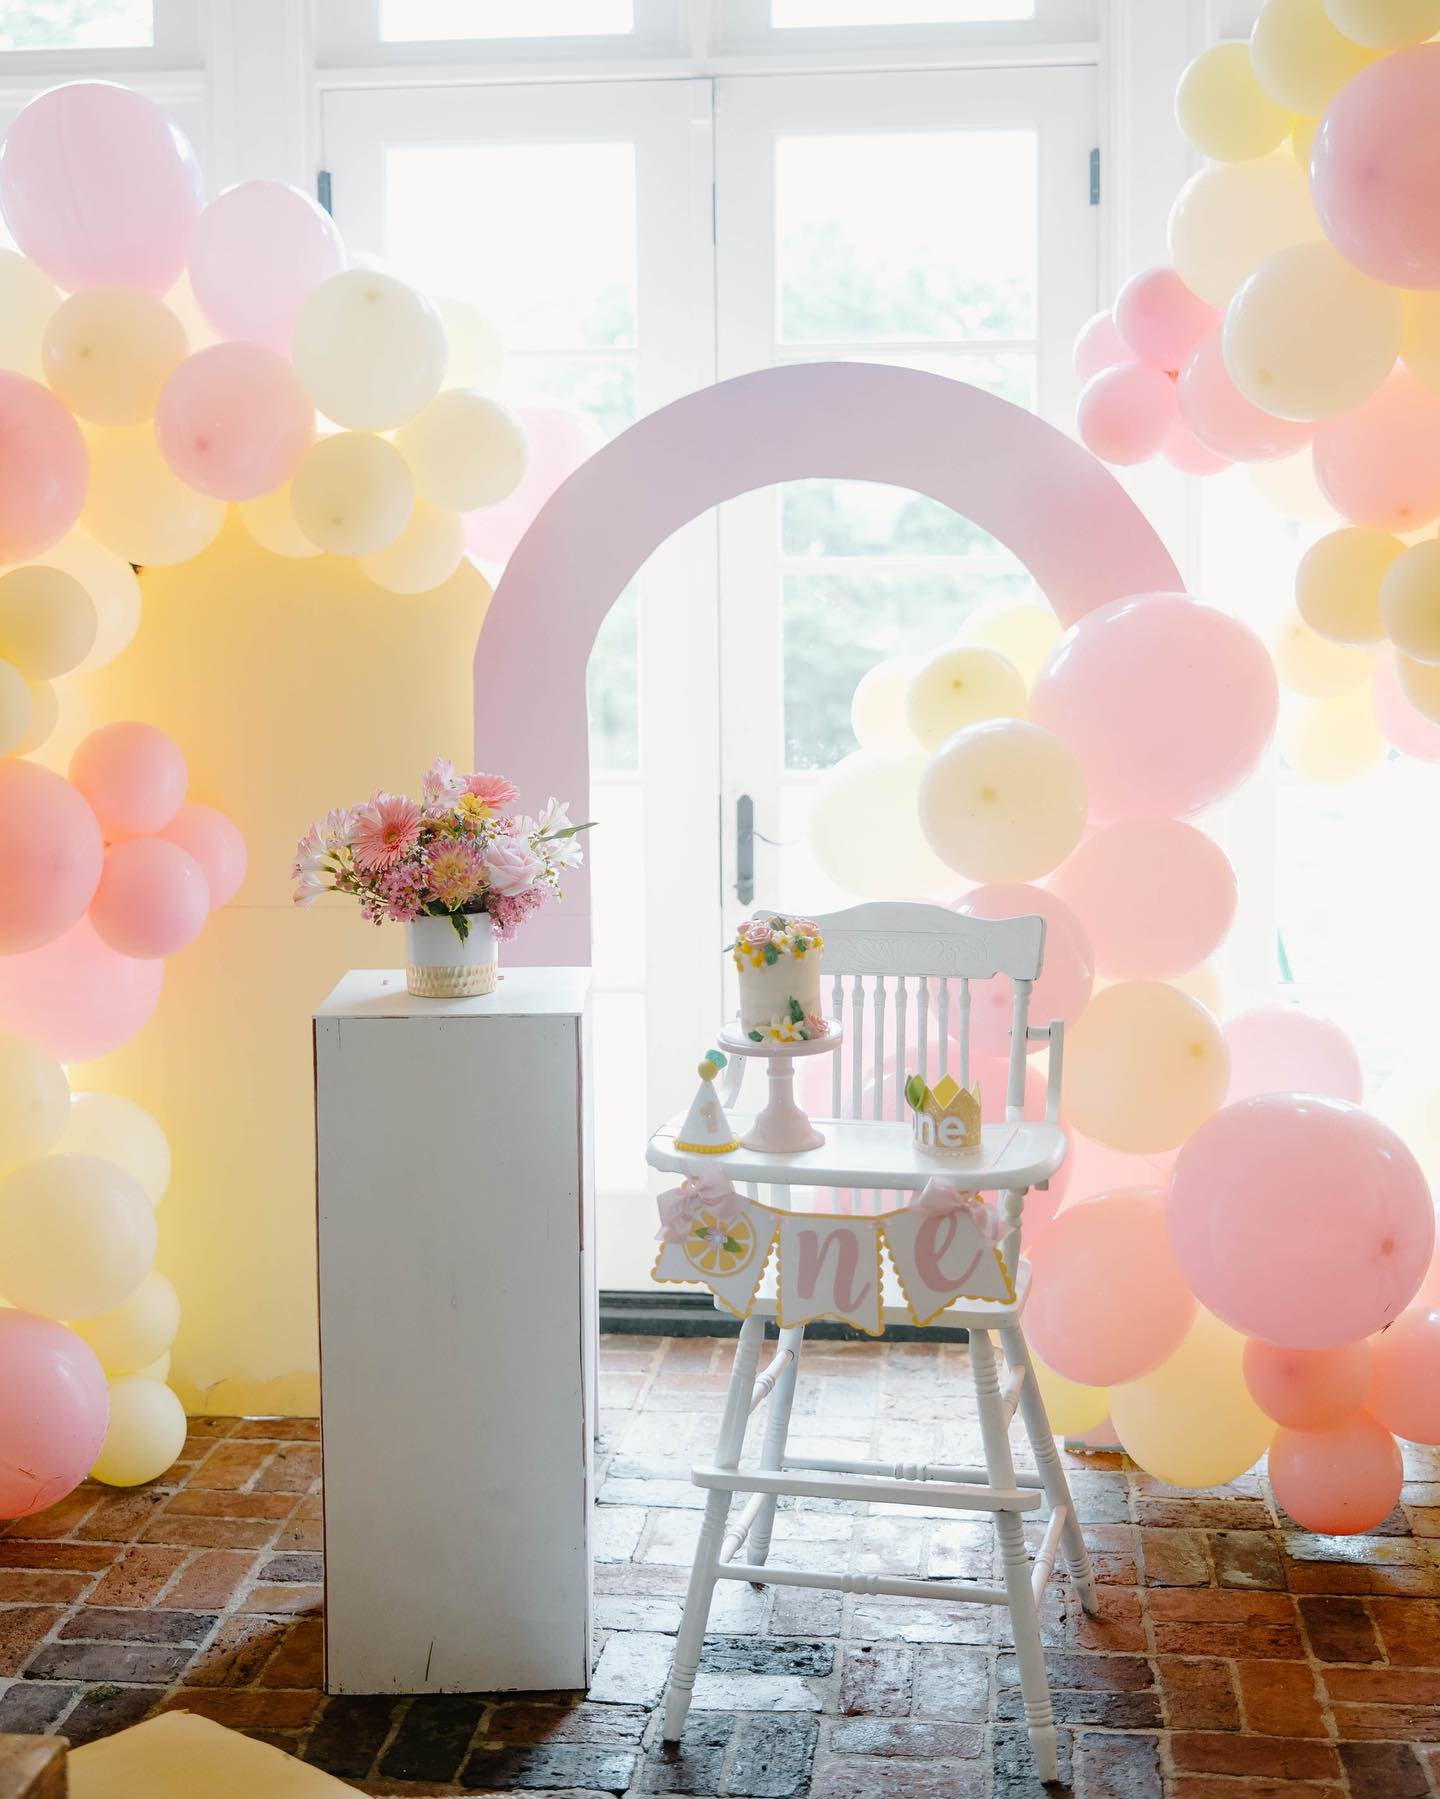 From soft pastels to bold brights, Eleanor&rsquo;s 1st Squeeze birthday party was surely one to remember! 🍋🎀

Event planning, styling + designing: @momenteventdesigns 
Backdrop: @momenteventdesigns + @goodwoodandco
Rentals: @pleasebeseatedrentals
P